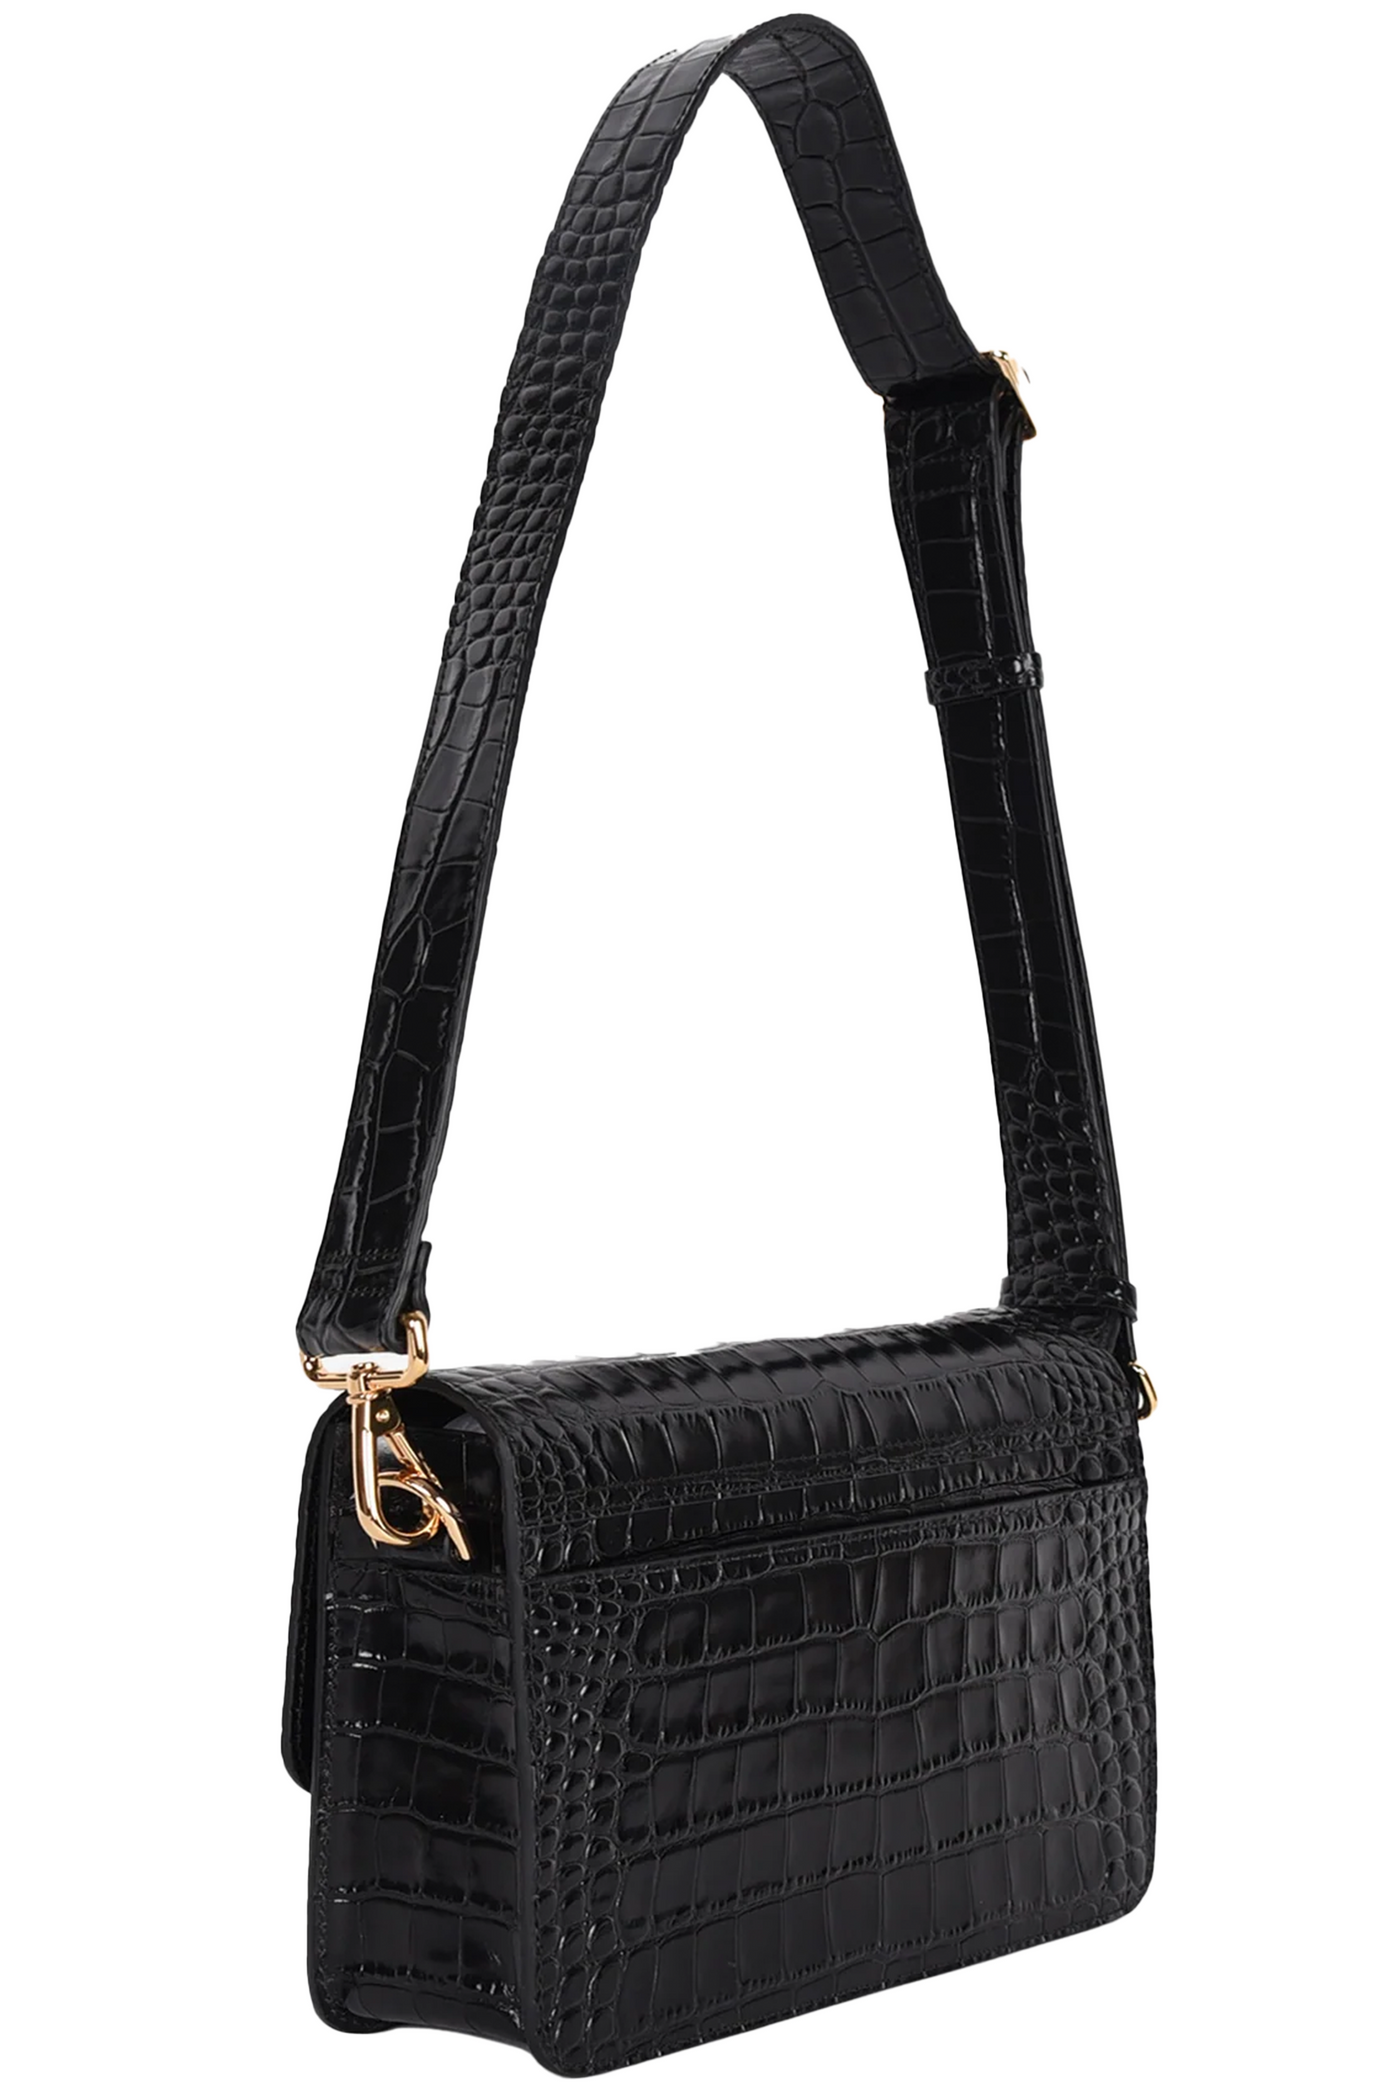 HYER GOODS: LUXE CUBE BAG HANDBAG WITH REMOVABLE SHOULDER STRAP IN BLACK LEATHER